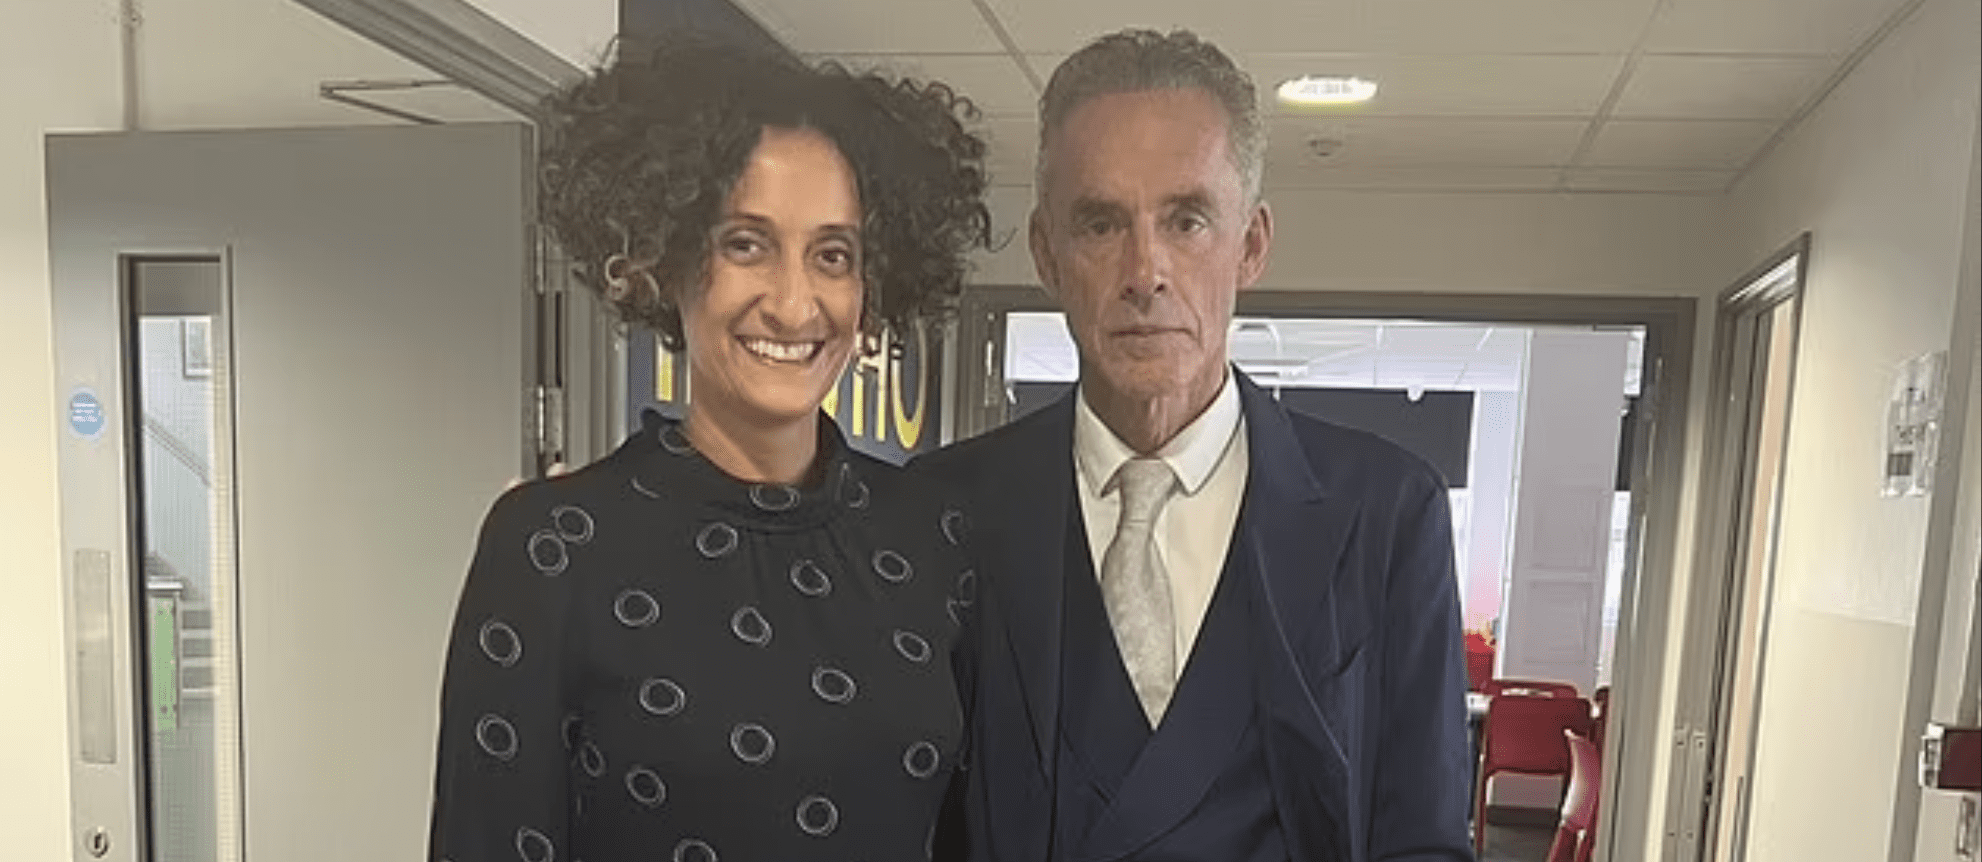 headmistress-of-england’s-most-successful-state-school-reported-to-police-for-‘hate-crime’-after-jordan-peterson-visit